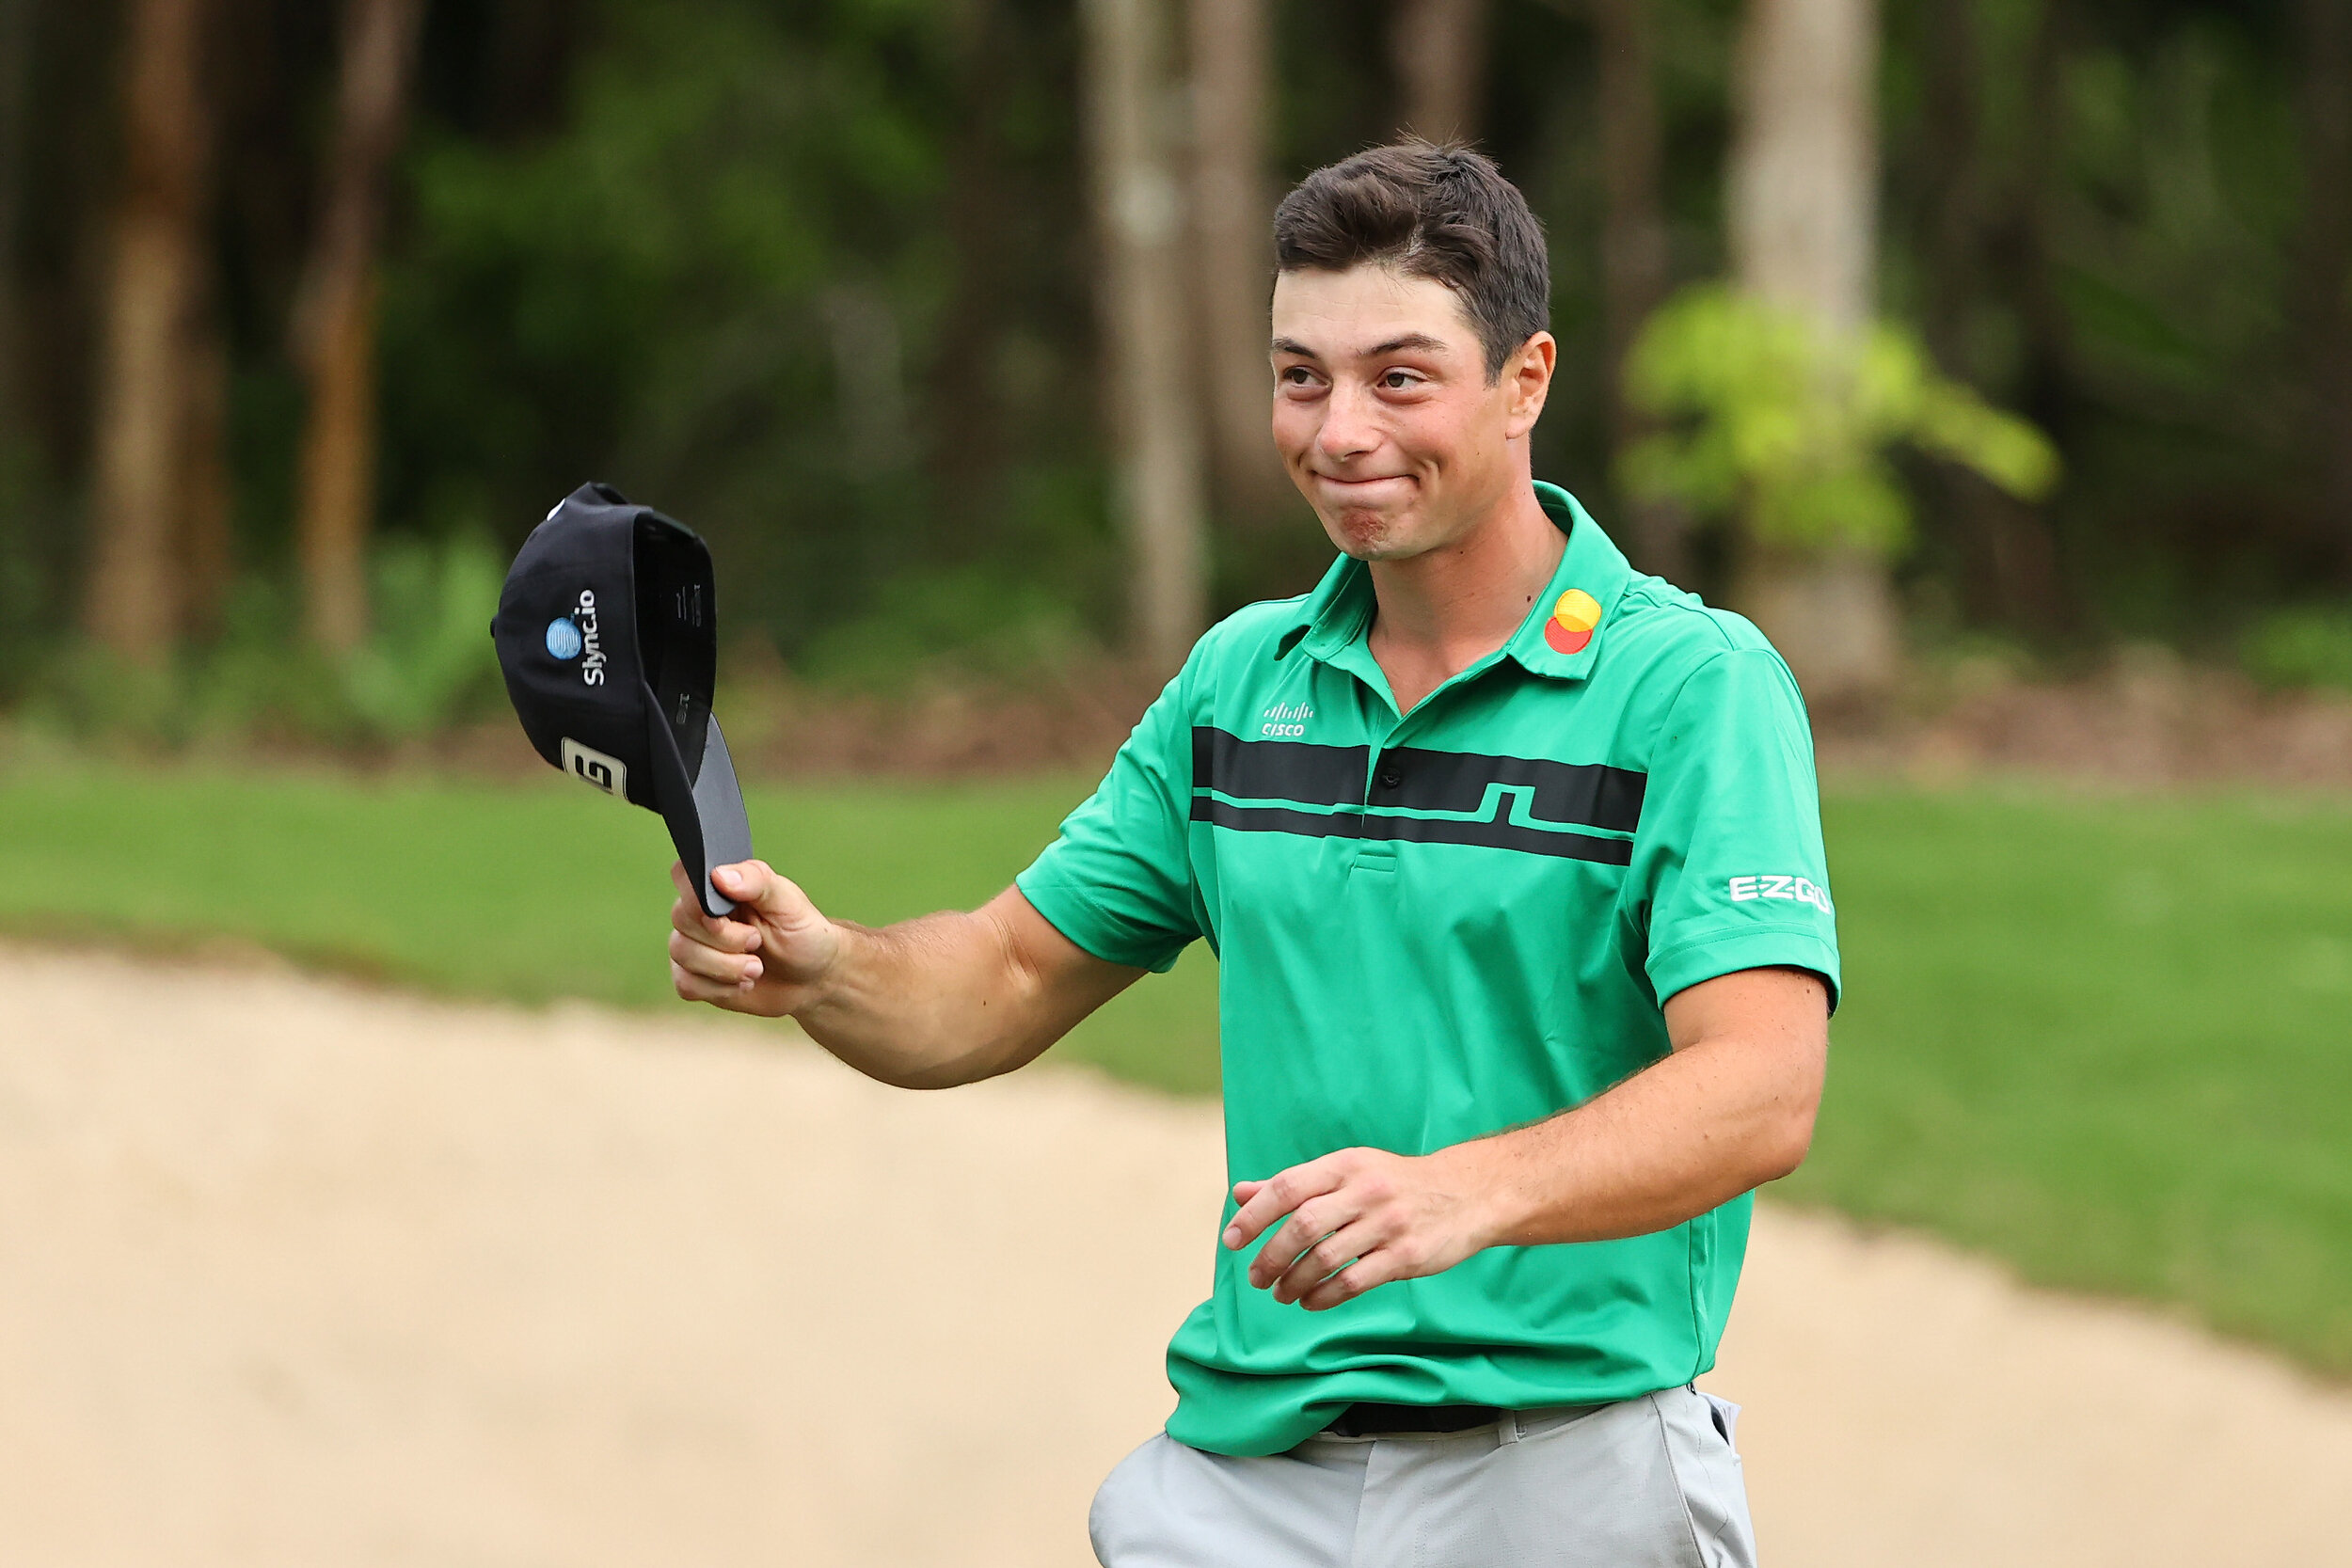  PLAYA DEL CARMEN, MEXICO - DECEMBER 06: Viktor Hovland of Norway celebrates his birdie on the 18th green to win during the final round of the Mayakoba Golf Classic at El Camaleón Golf Club on December 06, 2020 in Playa del Carmen, Mexico. (Photo by 